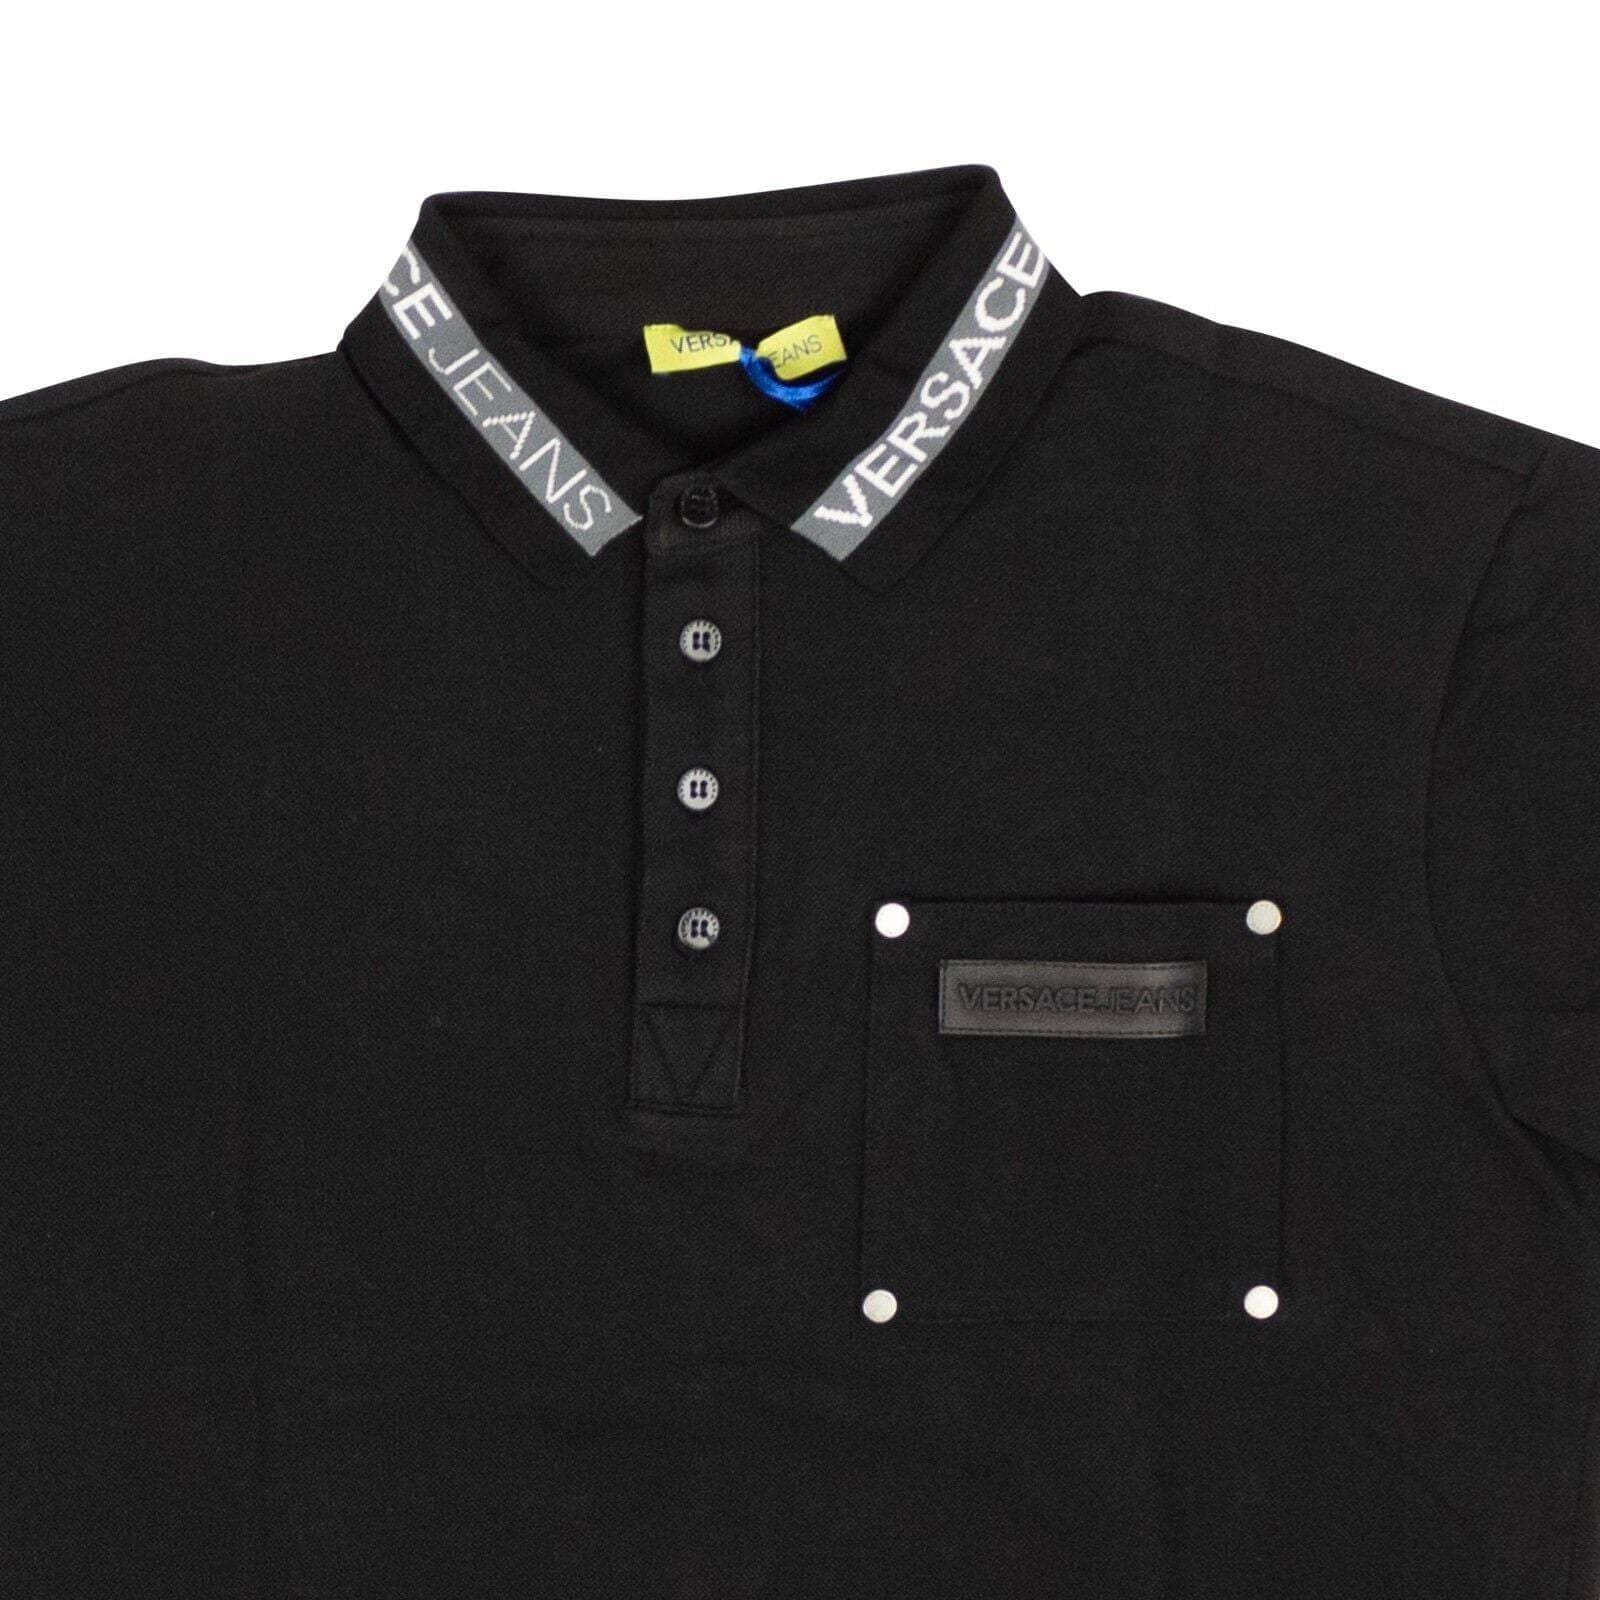 Versace channelenable-all, chicmi, couponcollection, gender-mens, main-clothing, mens-shoes, shop375, size-44, size-48, size-50, size-52, Stadium Goods, under-250, versace Black & White Logo On Collar T-Shirt